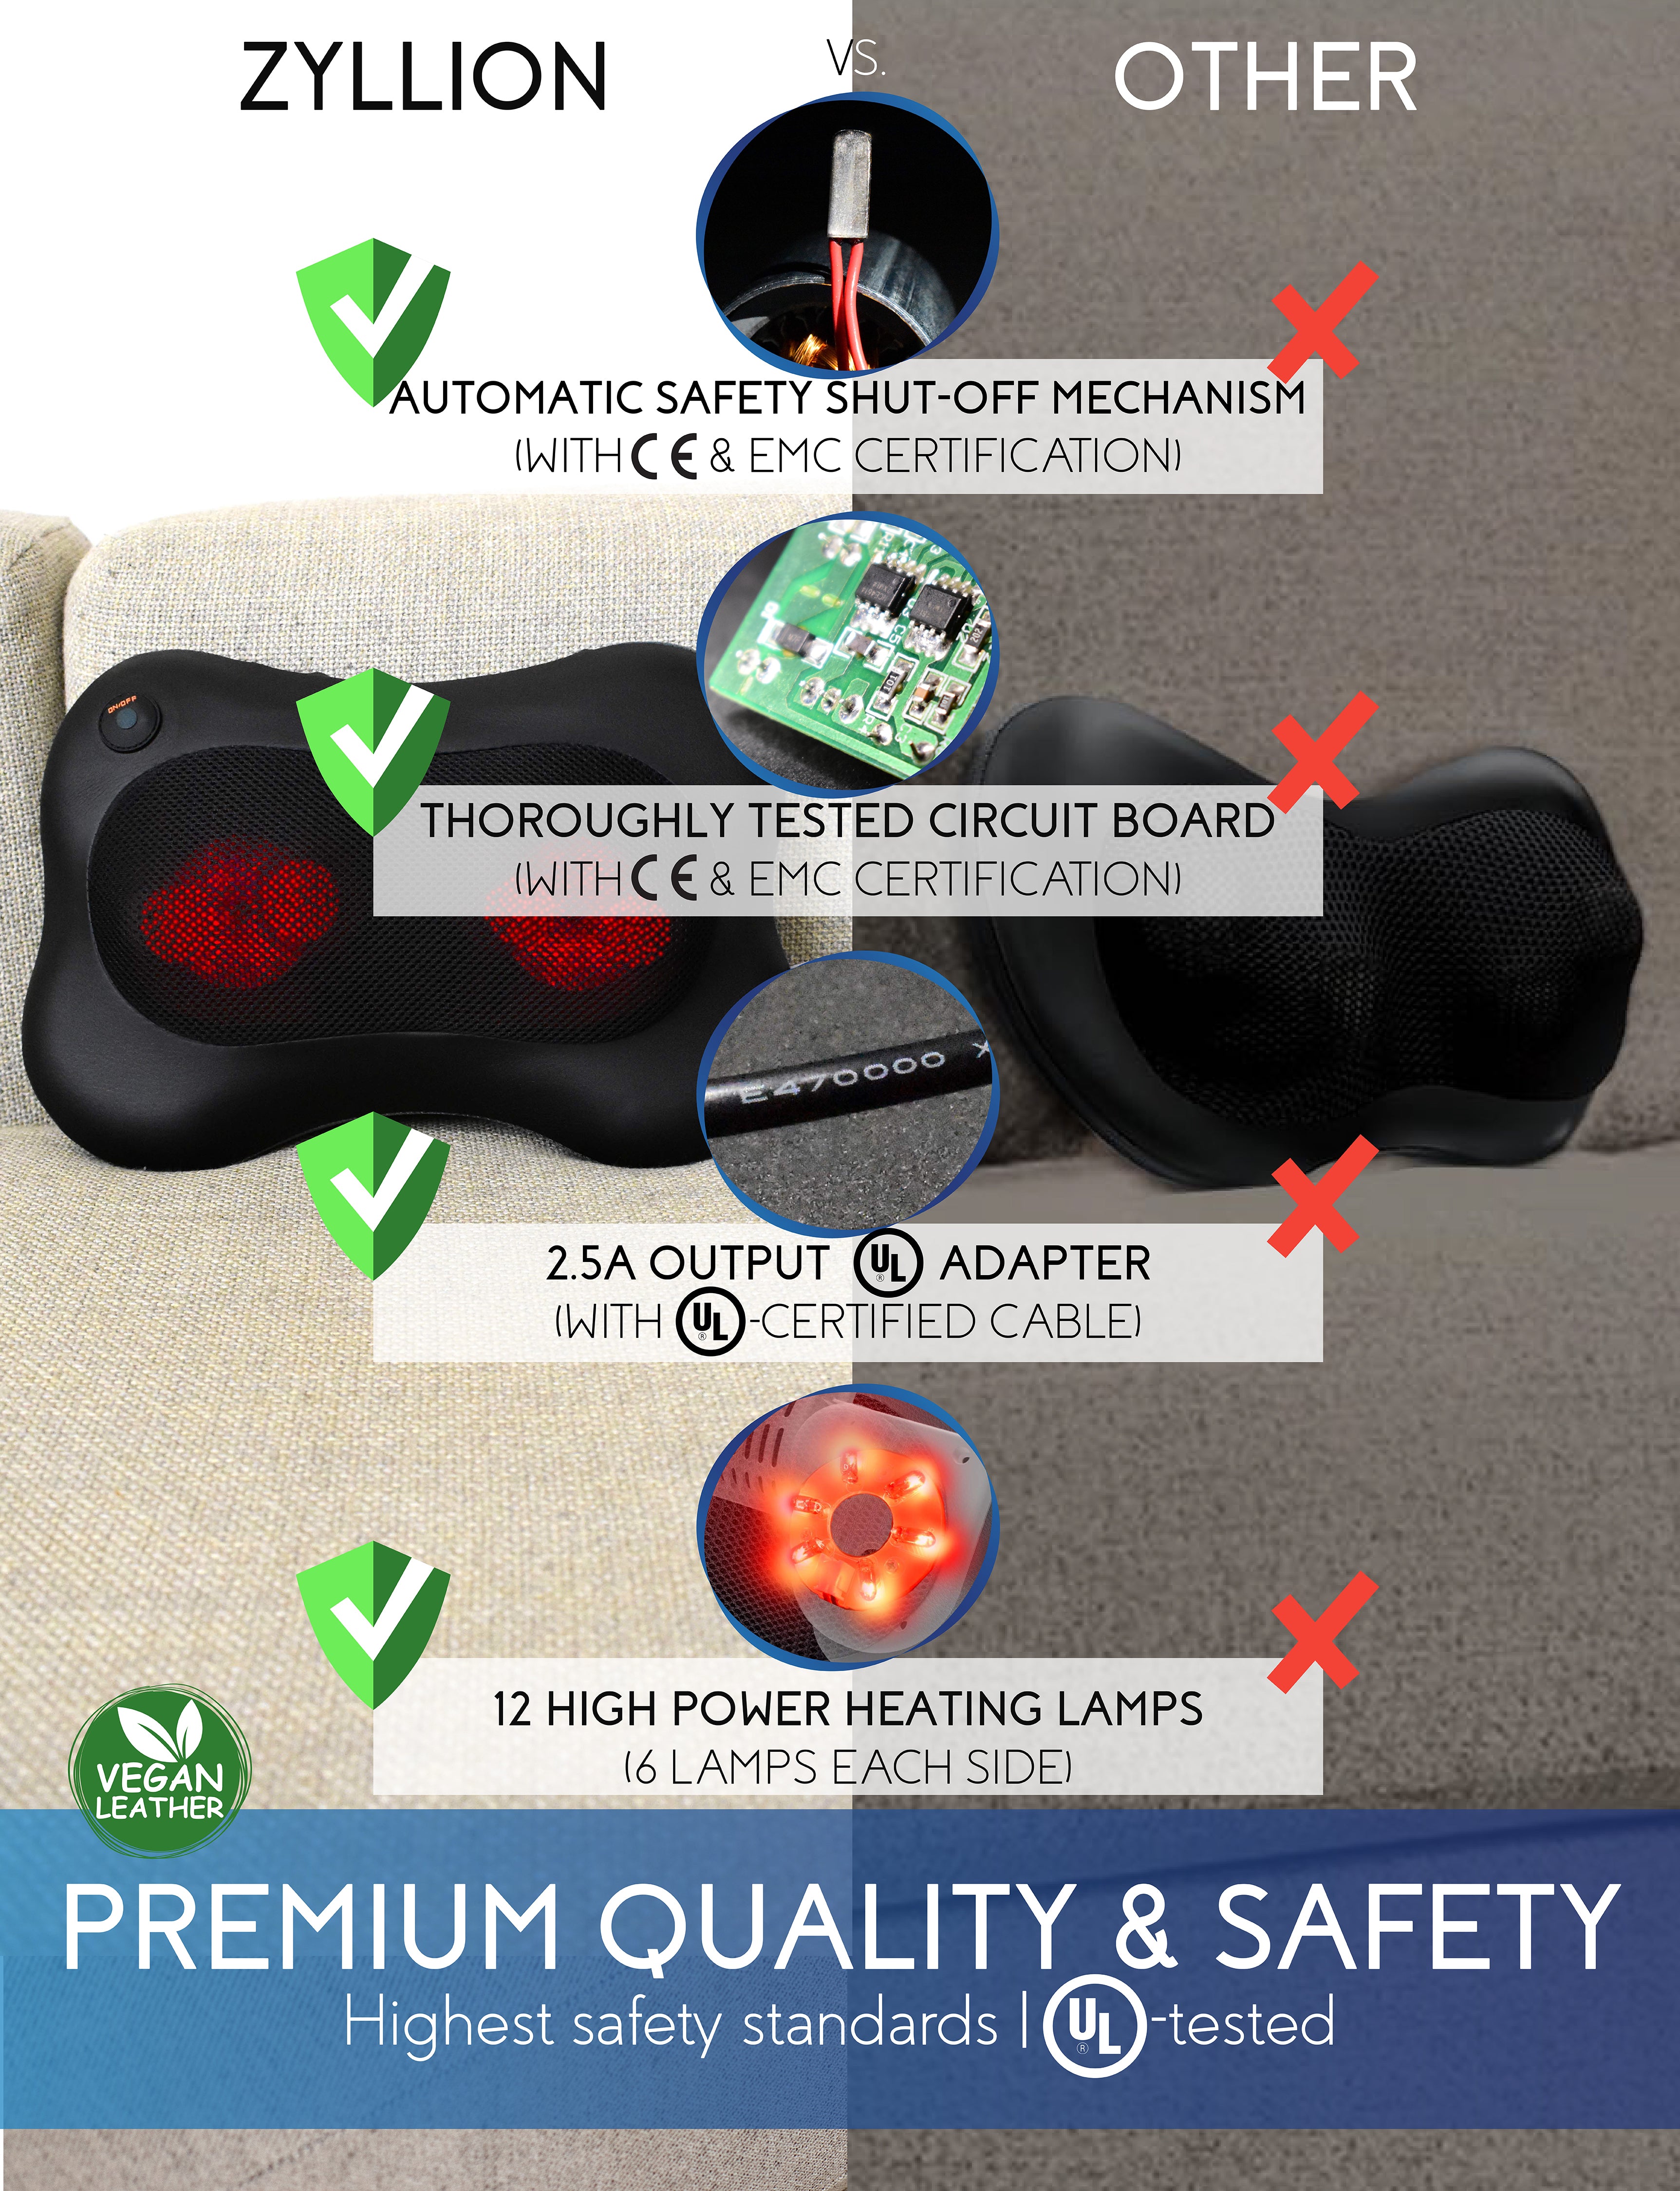 Zyllion Shiatsu Back and Neck Massager - Cordless Rechargeable 3D Kneading  Massage Pillow with Heat for Muscle Pain Relief - Black (ZMA-13RB-BK)